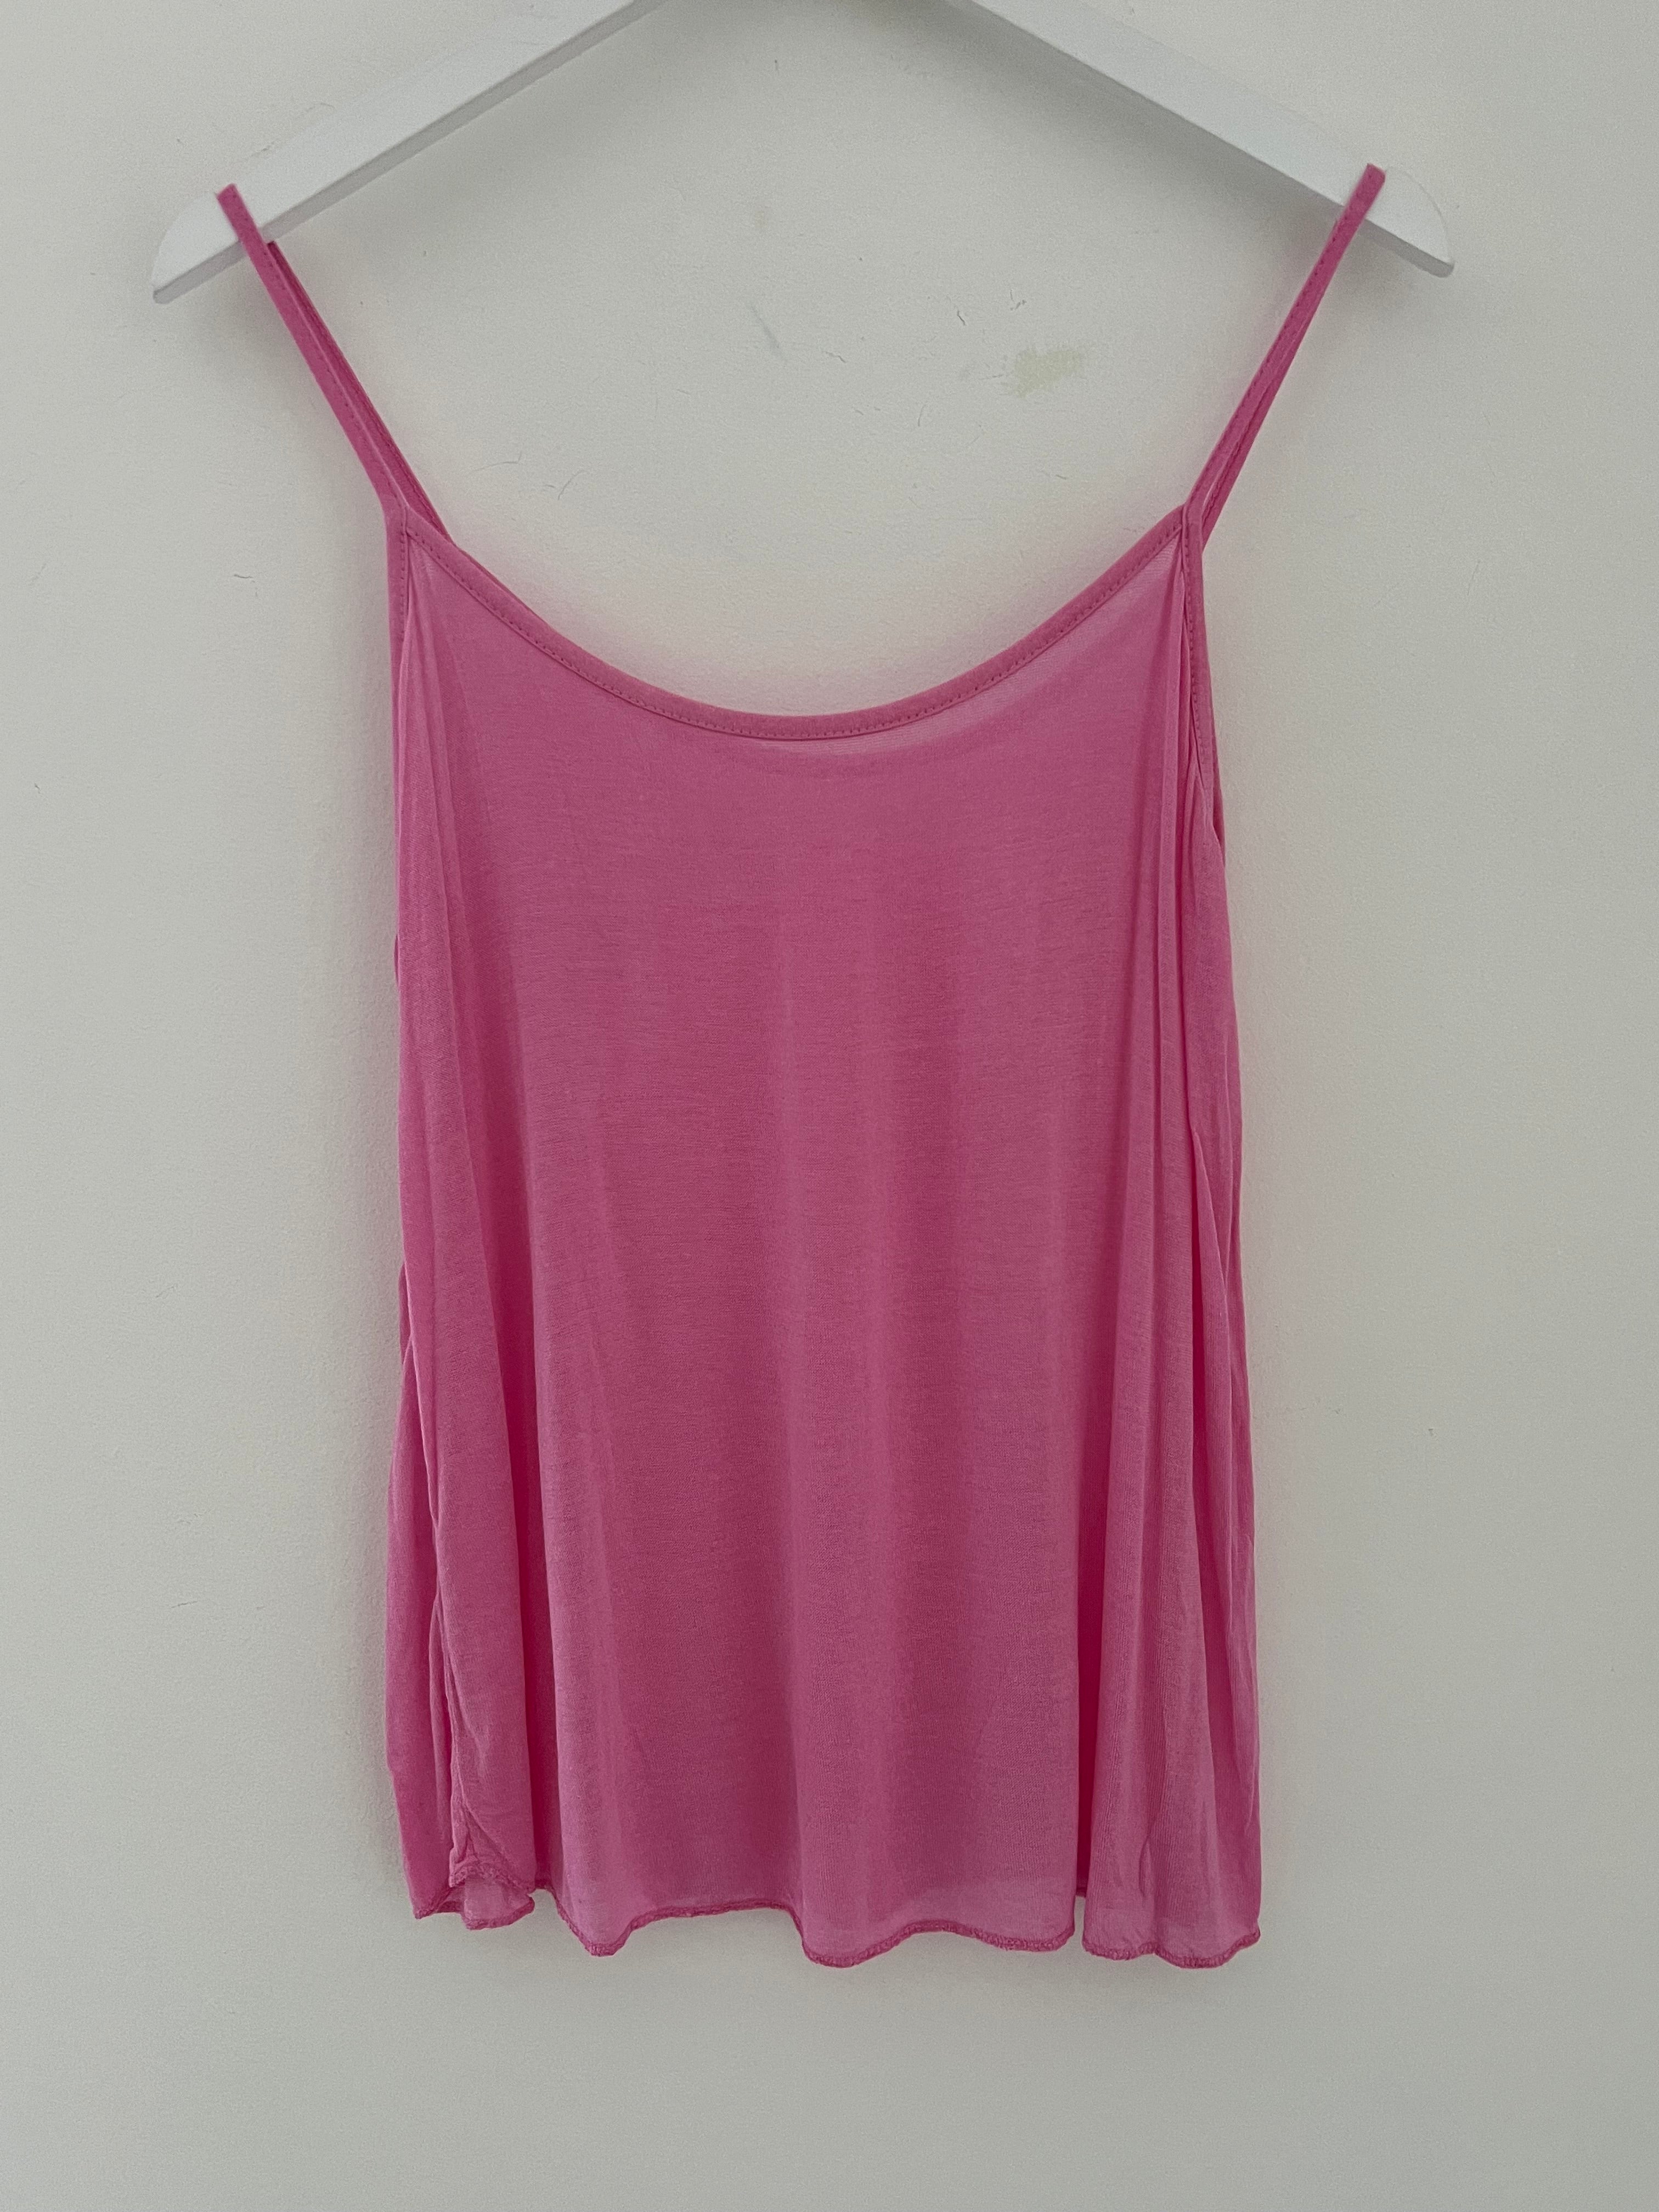 Lace Blouse & Cami in Bright Pink